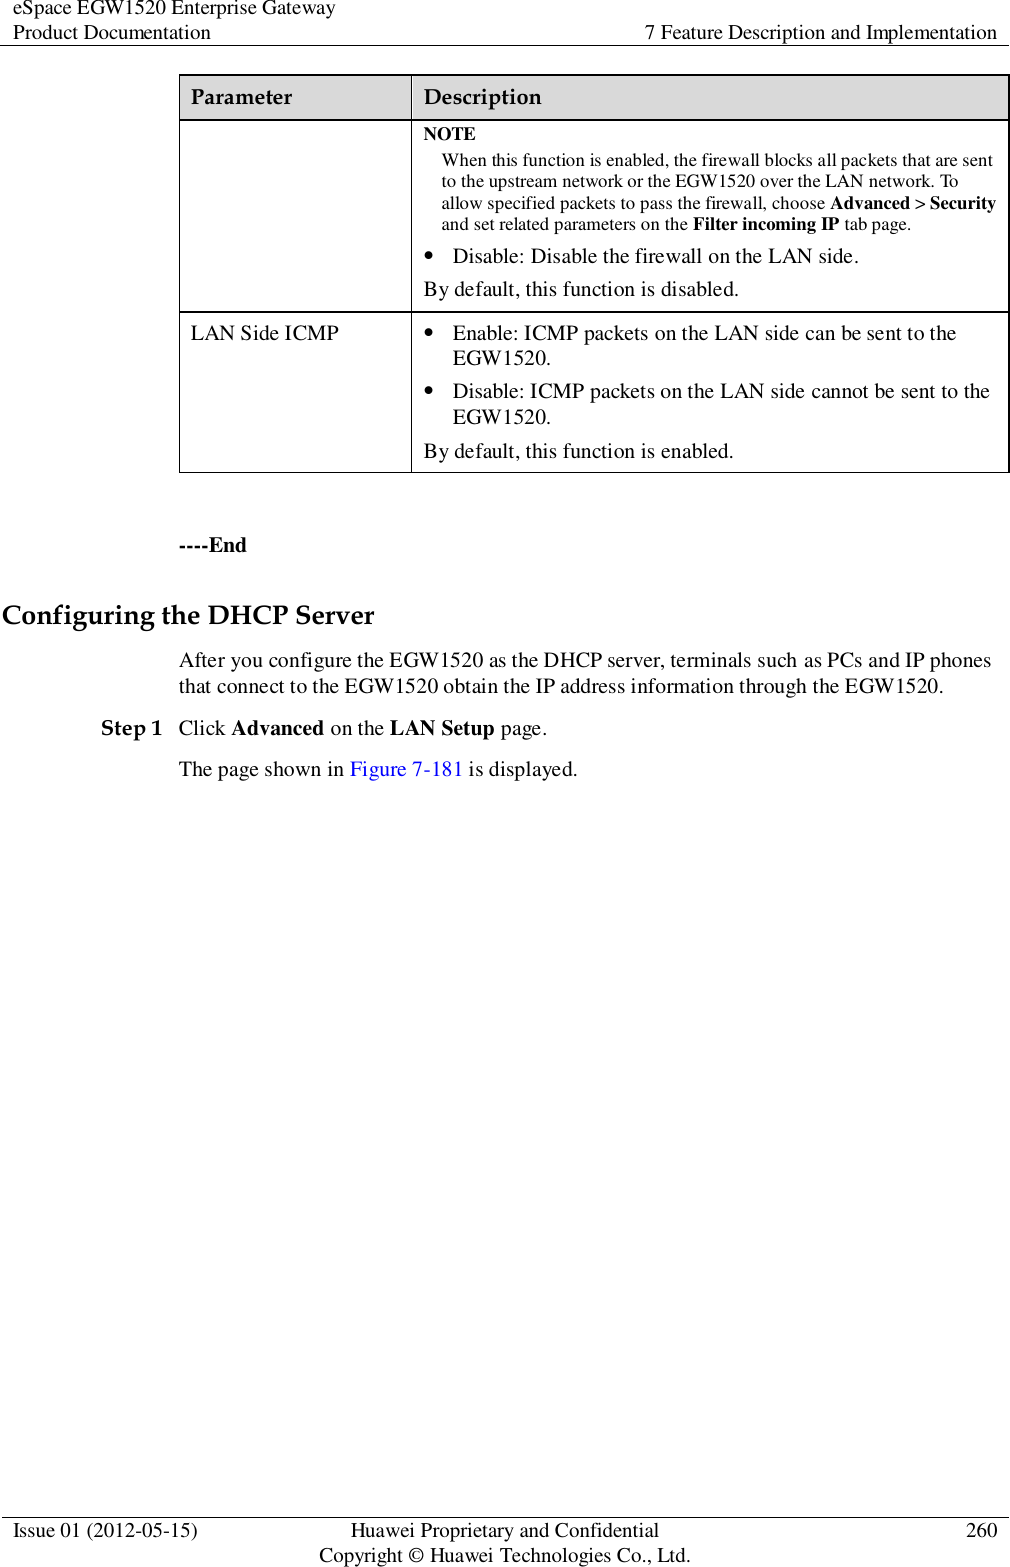 eSpace EGW1520 Enterprise Gateway Product Documentation 7 Feature Description and Implementation  Issue 01 (2012-05-15) Huawei Proprietary and Confidential                                     Copyright © Huawei Technologies Co., Ltd. 260  Parameter Description NOTE When this function is enabled, the firewall blocks all packets that are sent to the upstream network or the EGW1520 over the LAN network. To allow specified packets to pass the firewall, choose Advanced &gt; Security and set related parameters on the Filter incoming IP tab page.  Disable: Disable the firewall on the LAN side. By default, this function is disabled. LAN Side ICMP  Enable: ICMP packets on the LAN side can be sent to the EGW1520.  Disable: ICMP packets on the LAN side cannot be sent to the EGW1520. By default, this function is enabled.  ----End Configuring the DHCP Server After you configure the EGW1520 as the DHCP server, terminals such as PCs and IP phones that connect to the EGW1520 obtain the IP address information through the EGW1520. Step 1 Click Advanced on the LAN Setup page. The page shown in Figure 7-181 is displayed. 